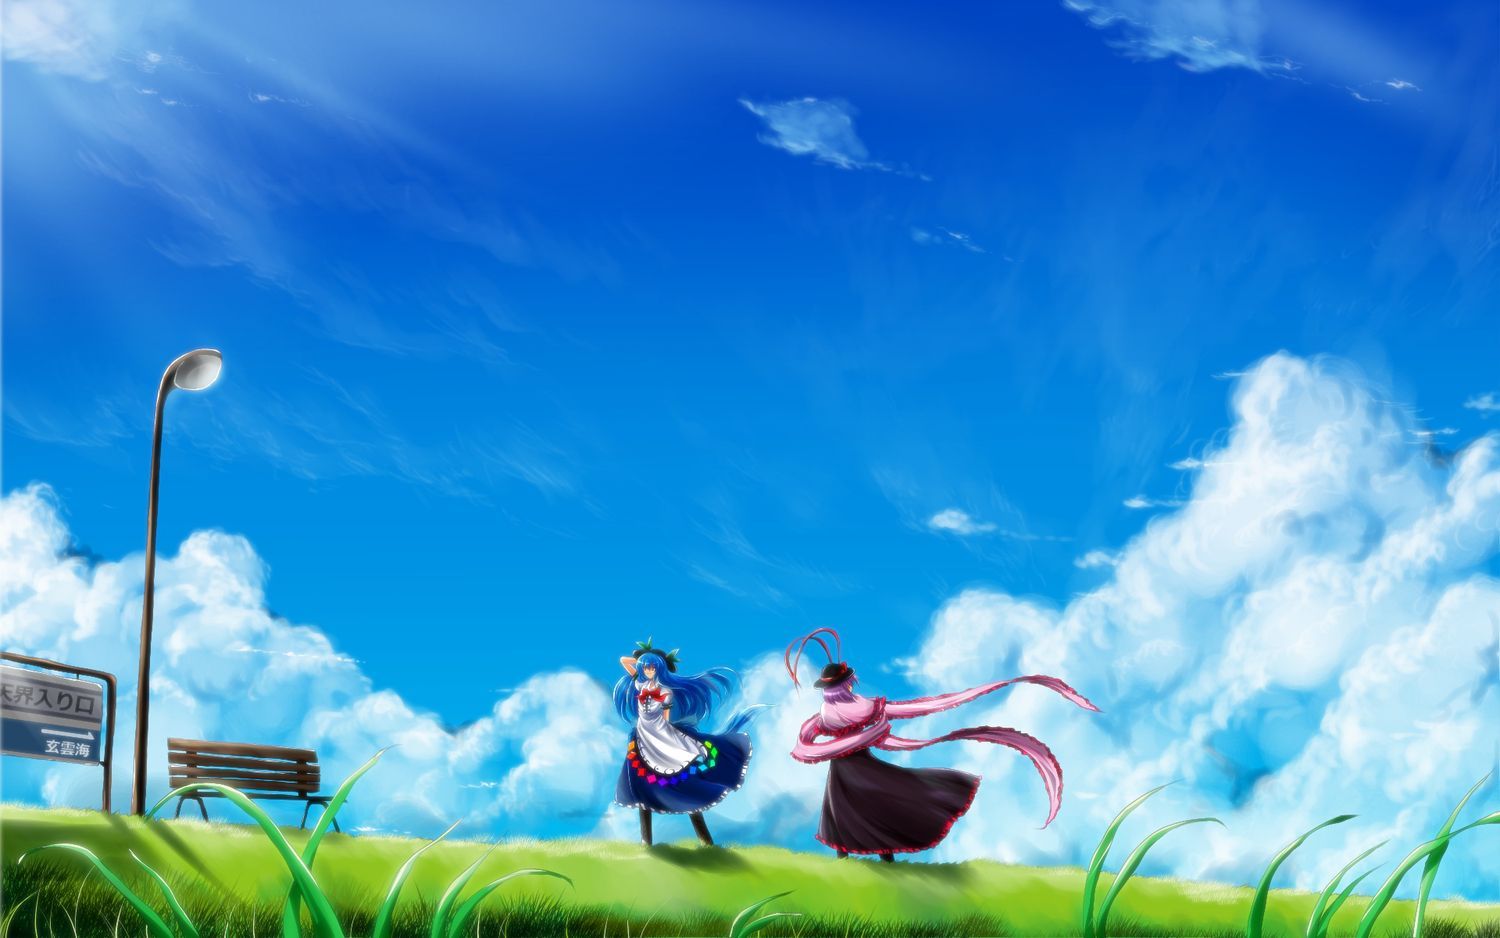 2girls blue_hair bow clouds dress grass hat hinanawi_tenshi landscape leaves long_hair na. Anime scenery wallpaper, Landscape picture, Digital painting landscape